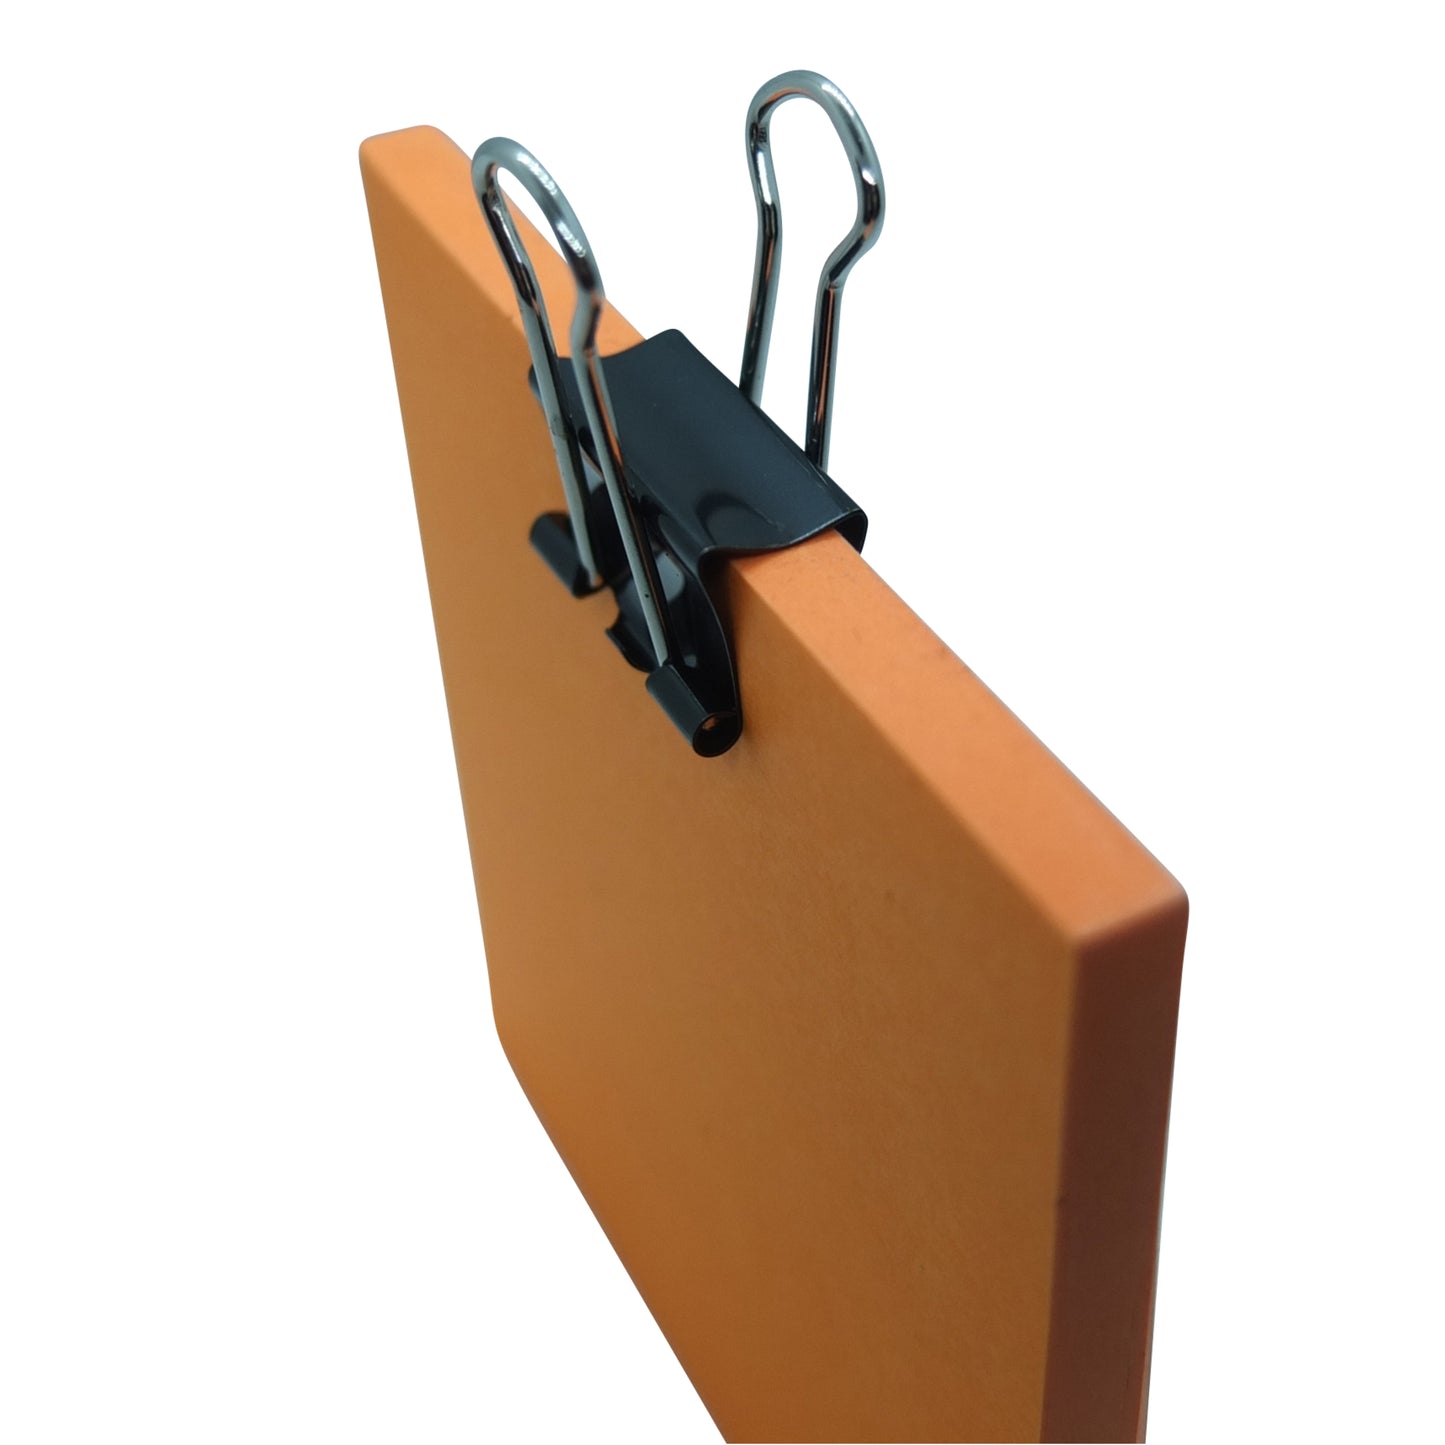 Gobrecht & Ulrich Black Foldback Clip Example Use with Small Sheets of Paper